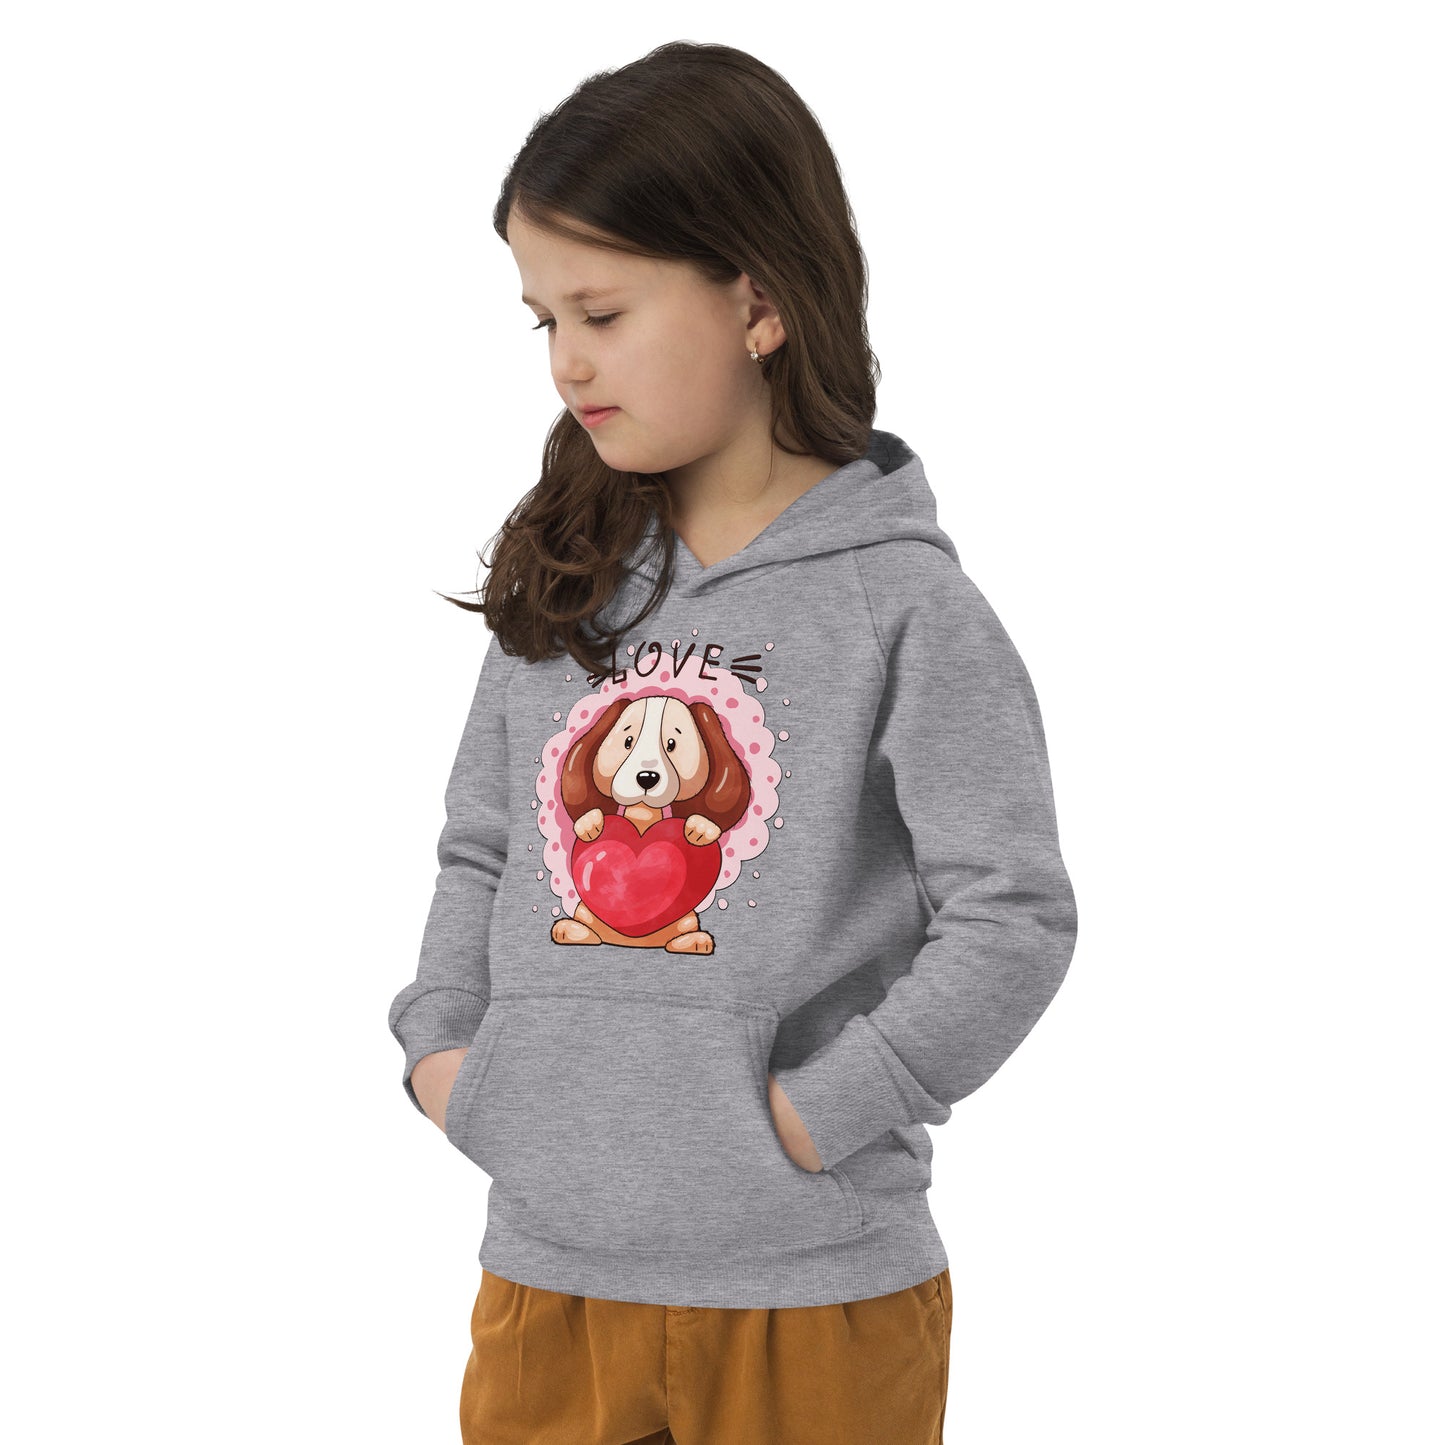 Lovely Puppy Dog with Heart Hoodie, No. 0482